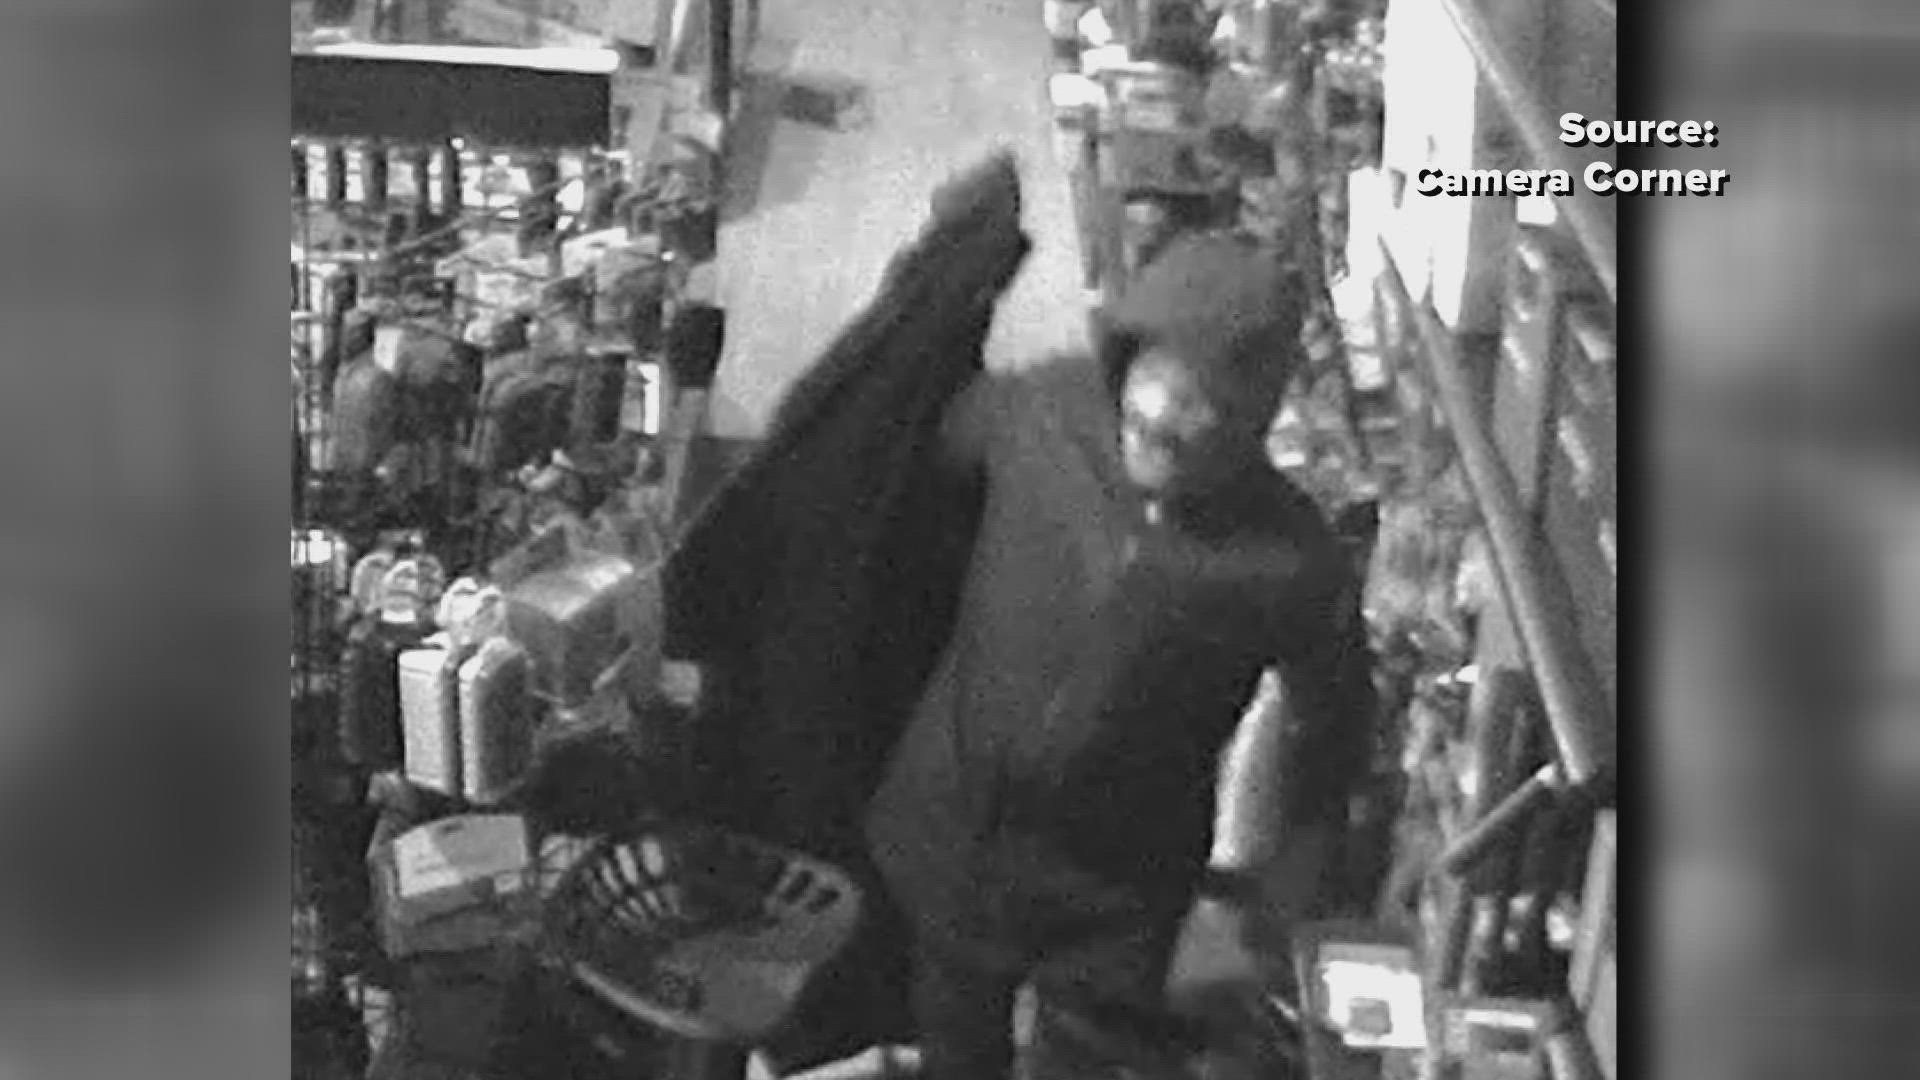 Surveillance video captured the suspects taking items from the store just days after Christmas.